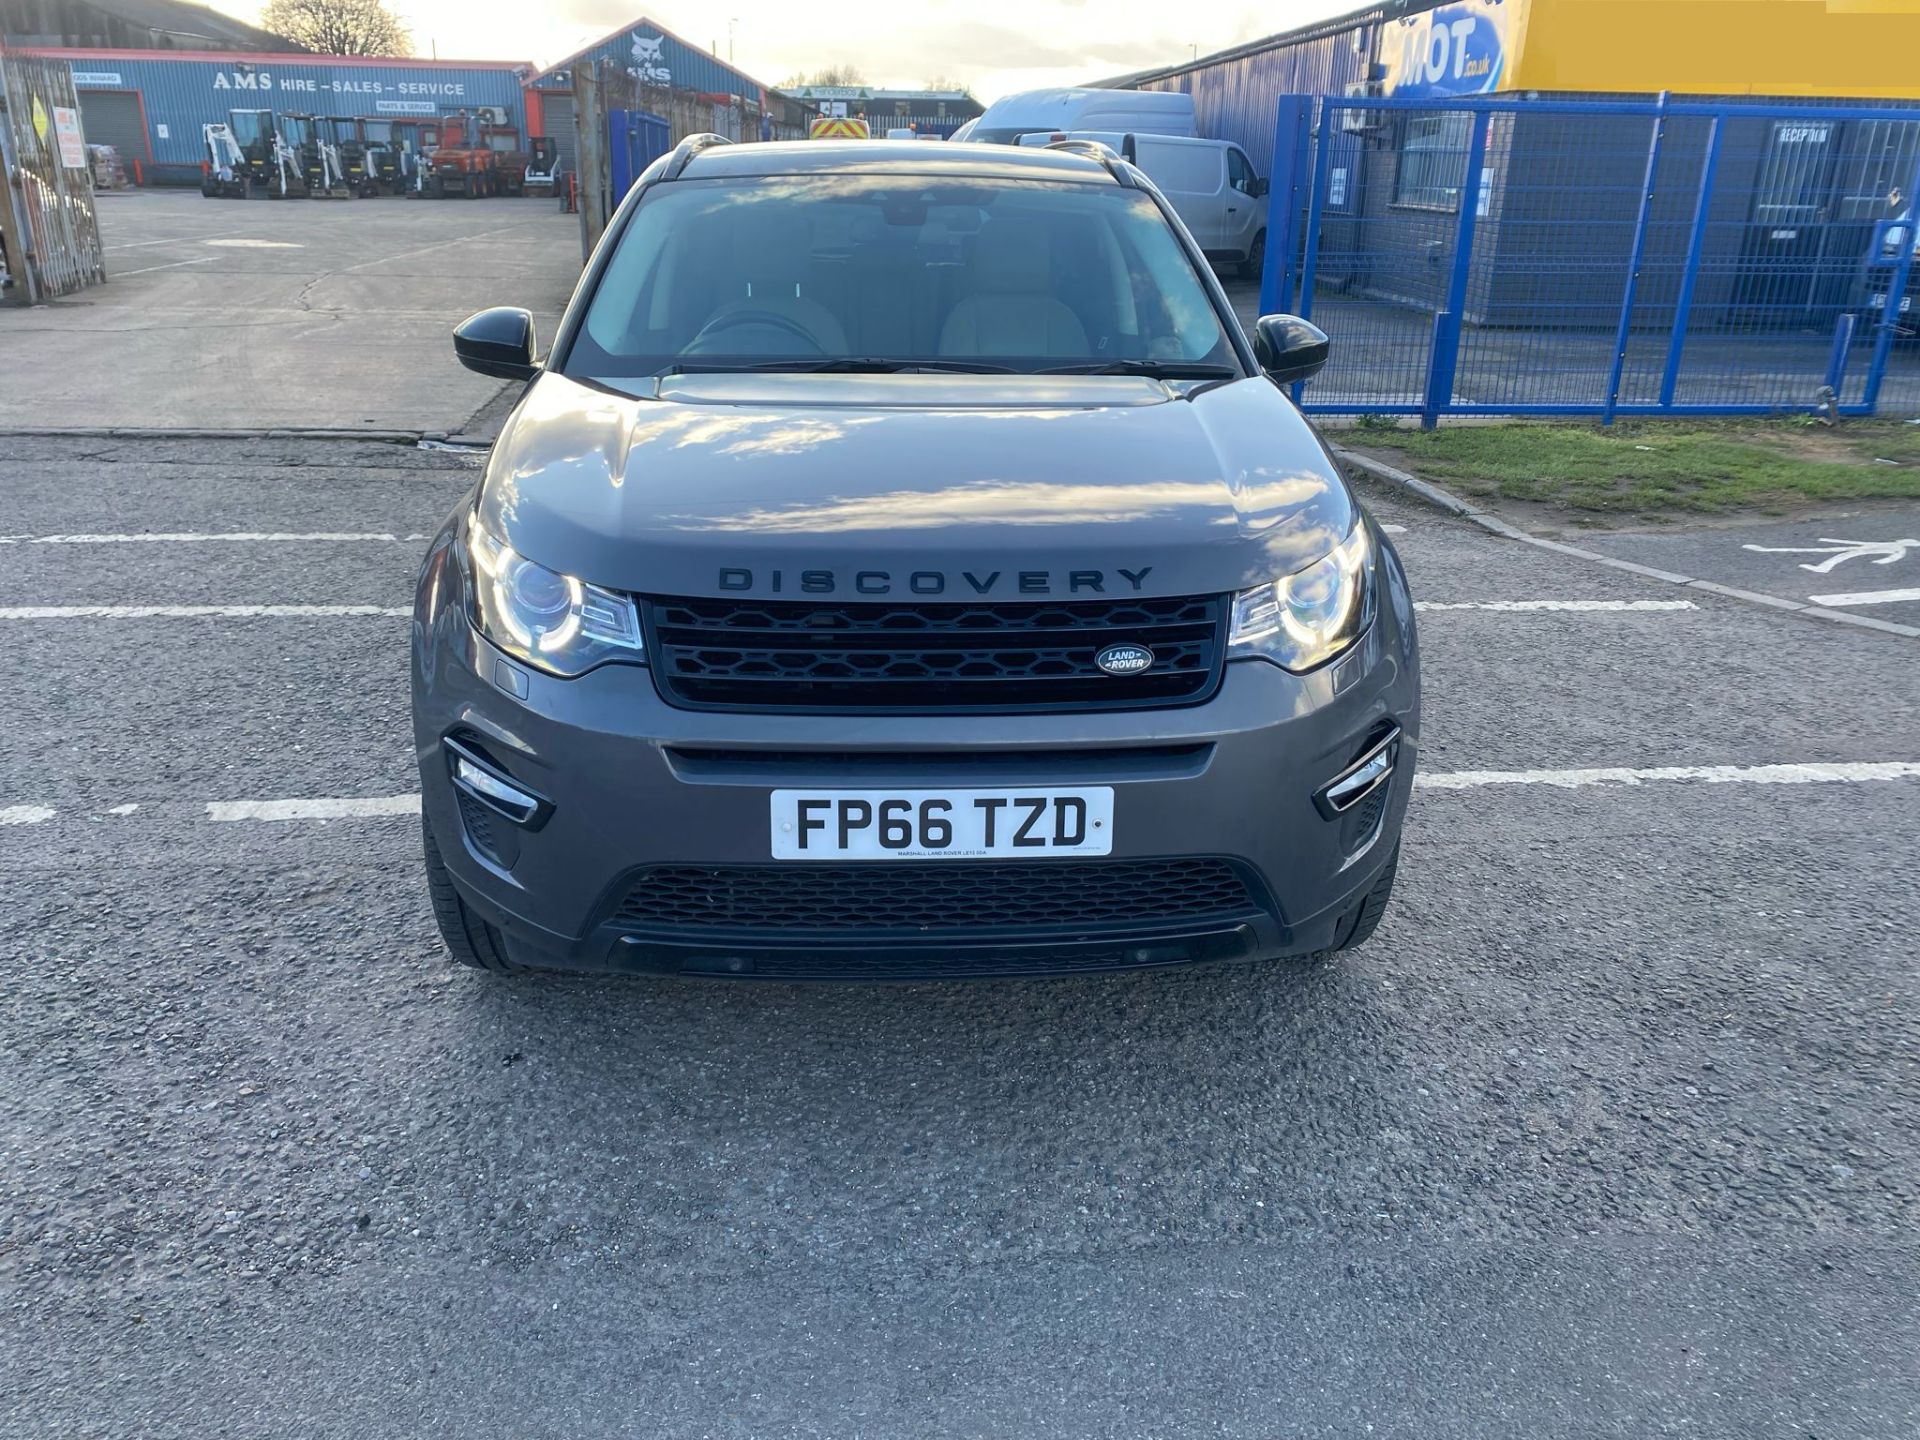 2016 66 LAND ROVER DISCOVERY SPORT HSE SUV ESTATE- 88K WITH LAND ROVER SERVICE HISTORY - PAN ROOF. - Image 10 of 19